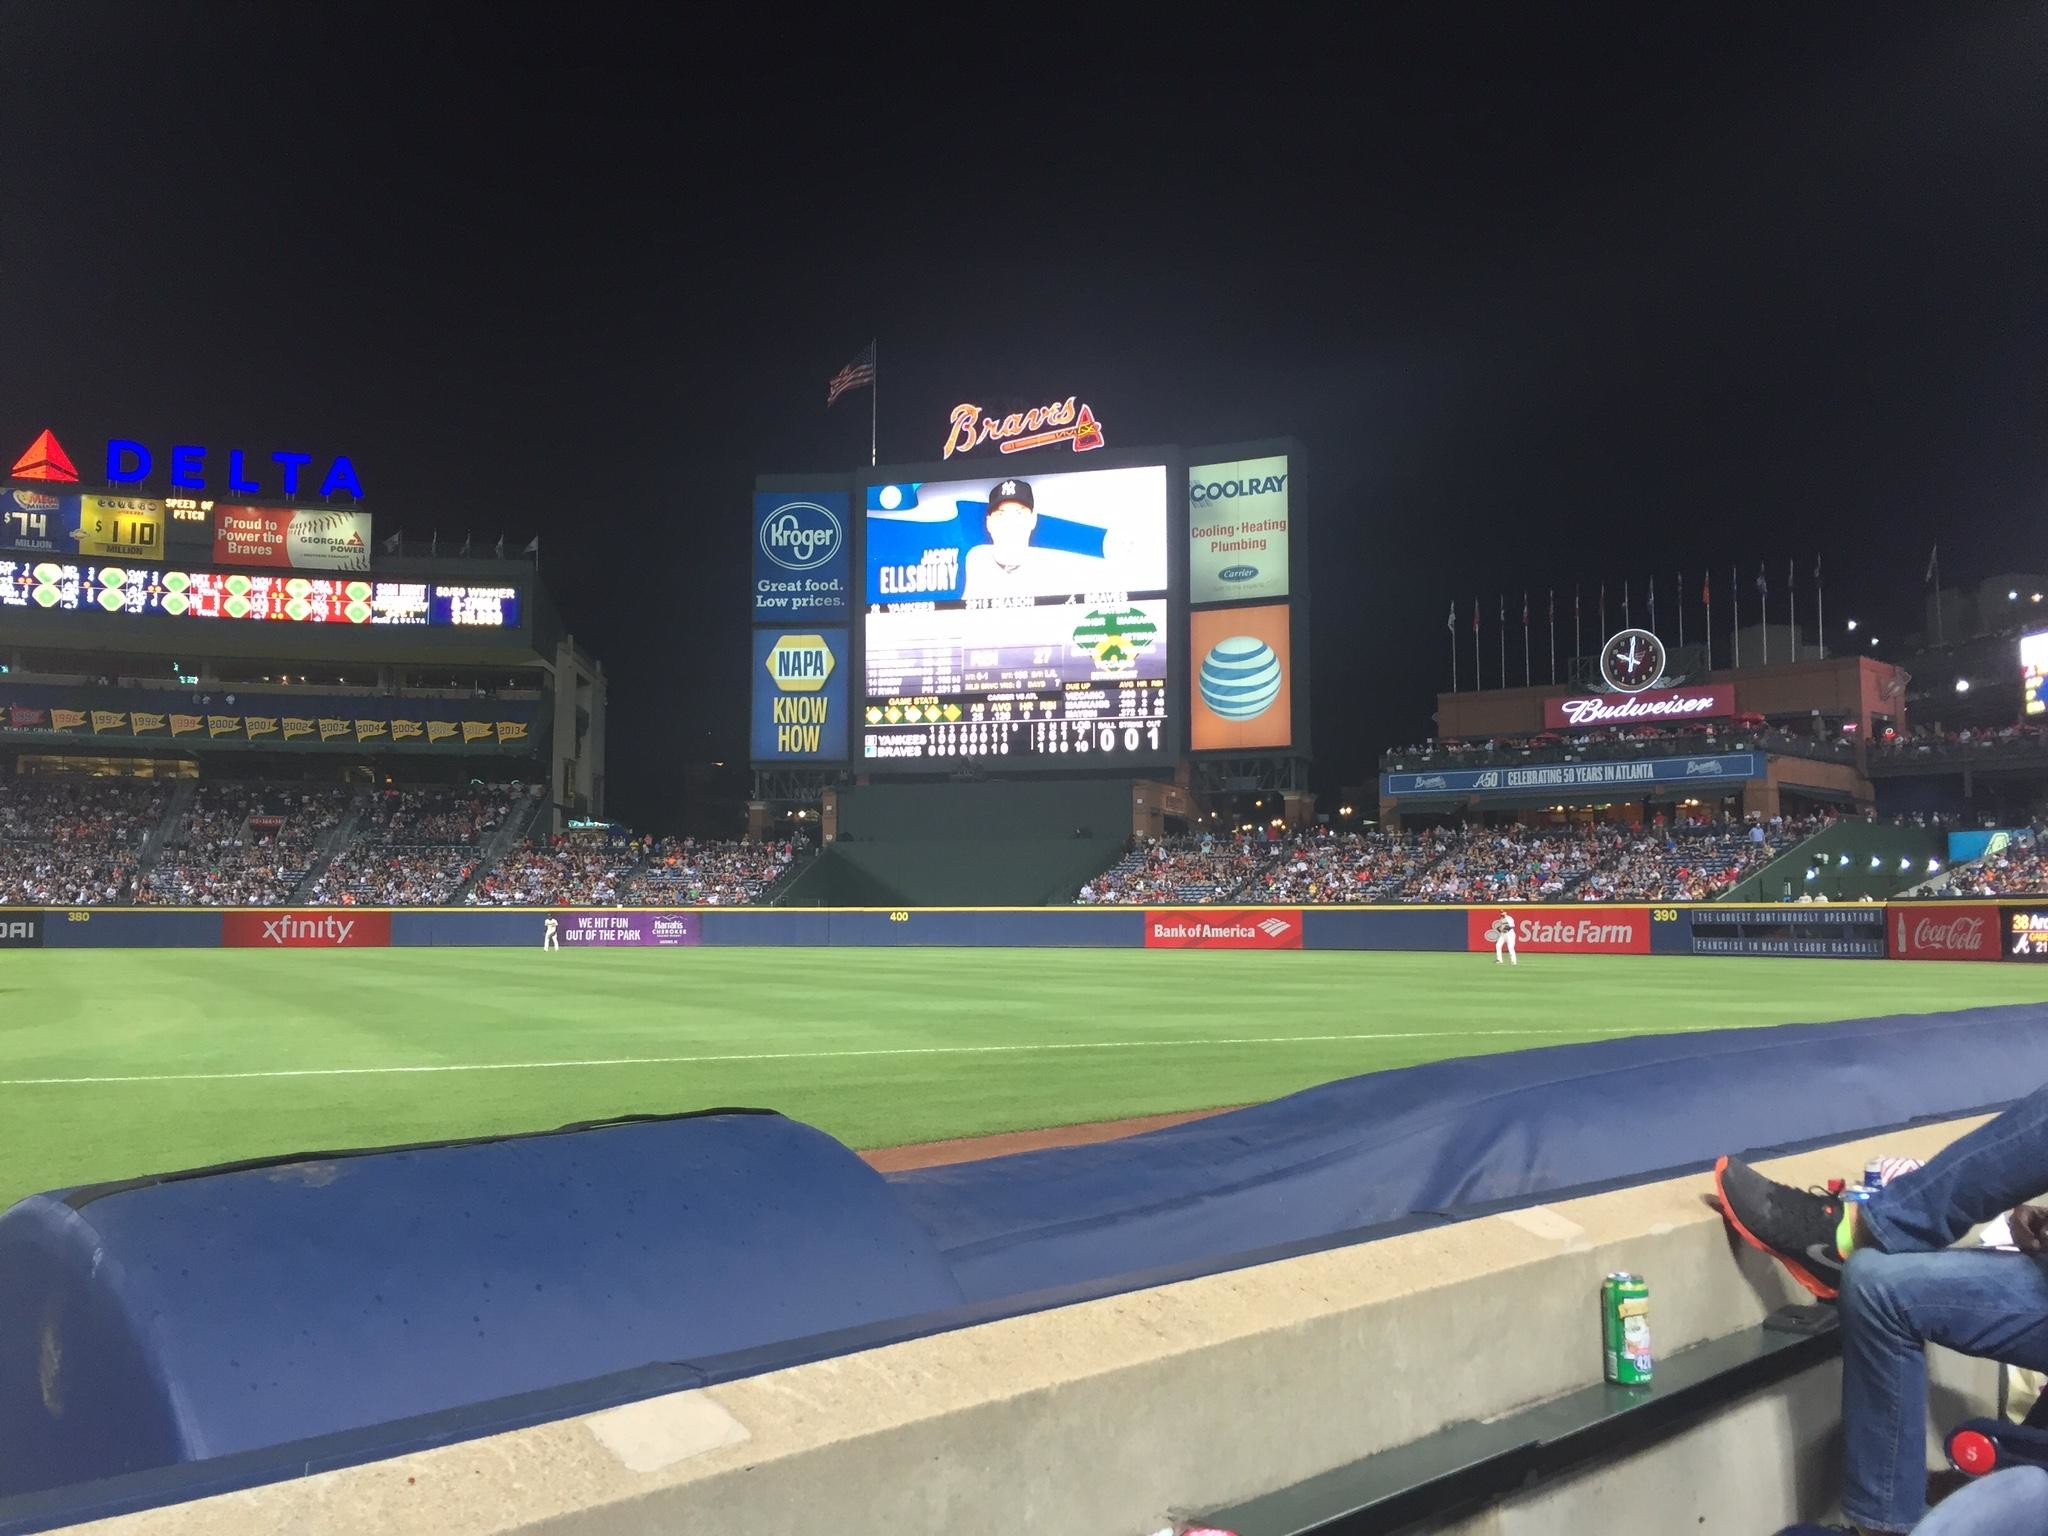 2048x1536 Turner Field Section 17r Row 2 Seat 2.